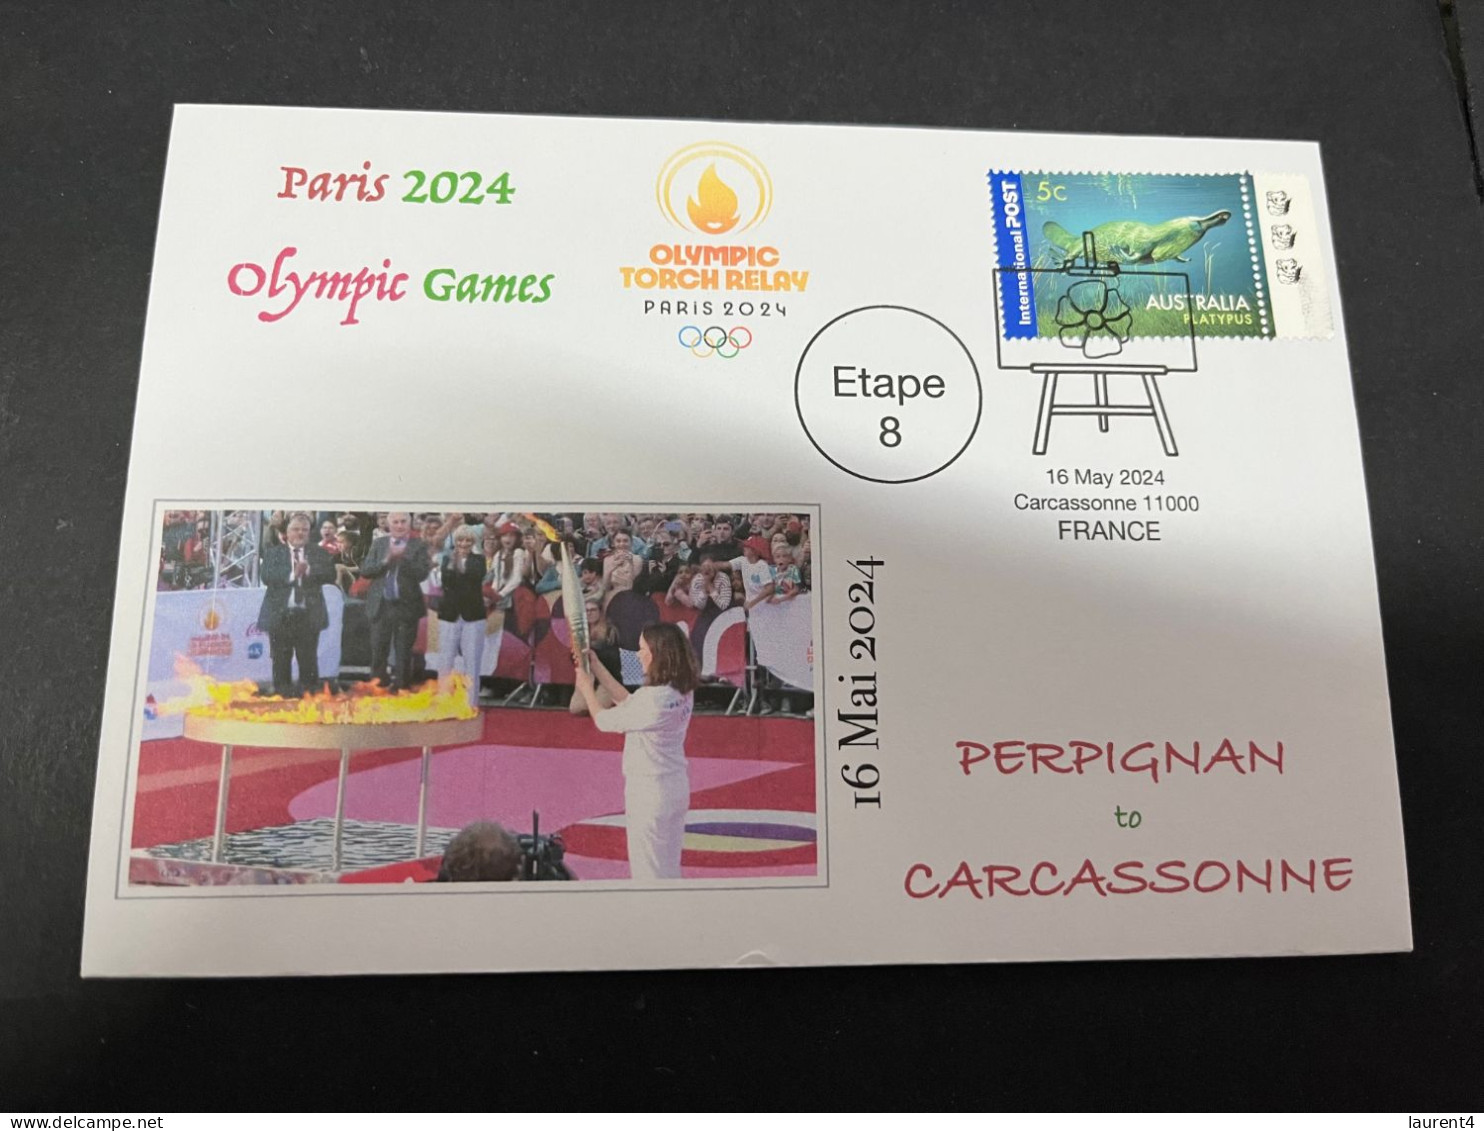 17-5-2024 (5 Z 17) Paris Olympic Games 2024 - Torch Relay (Etape 8) In Carcassonne (16-5-2024) With OZ Stamp - Summer 2024: Paris